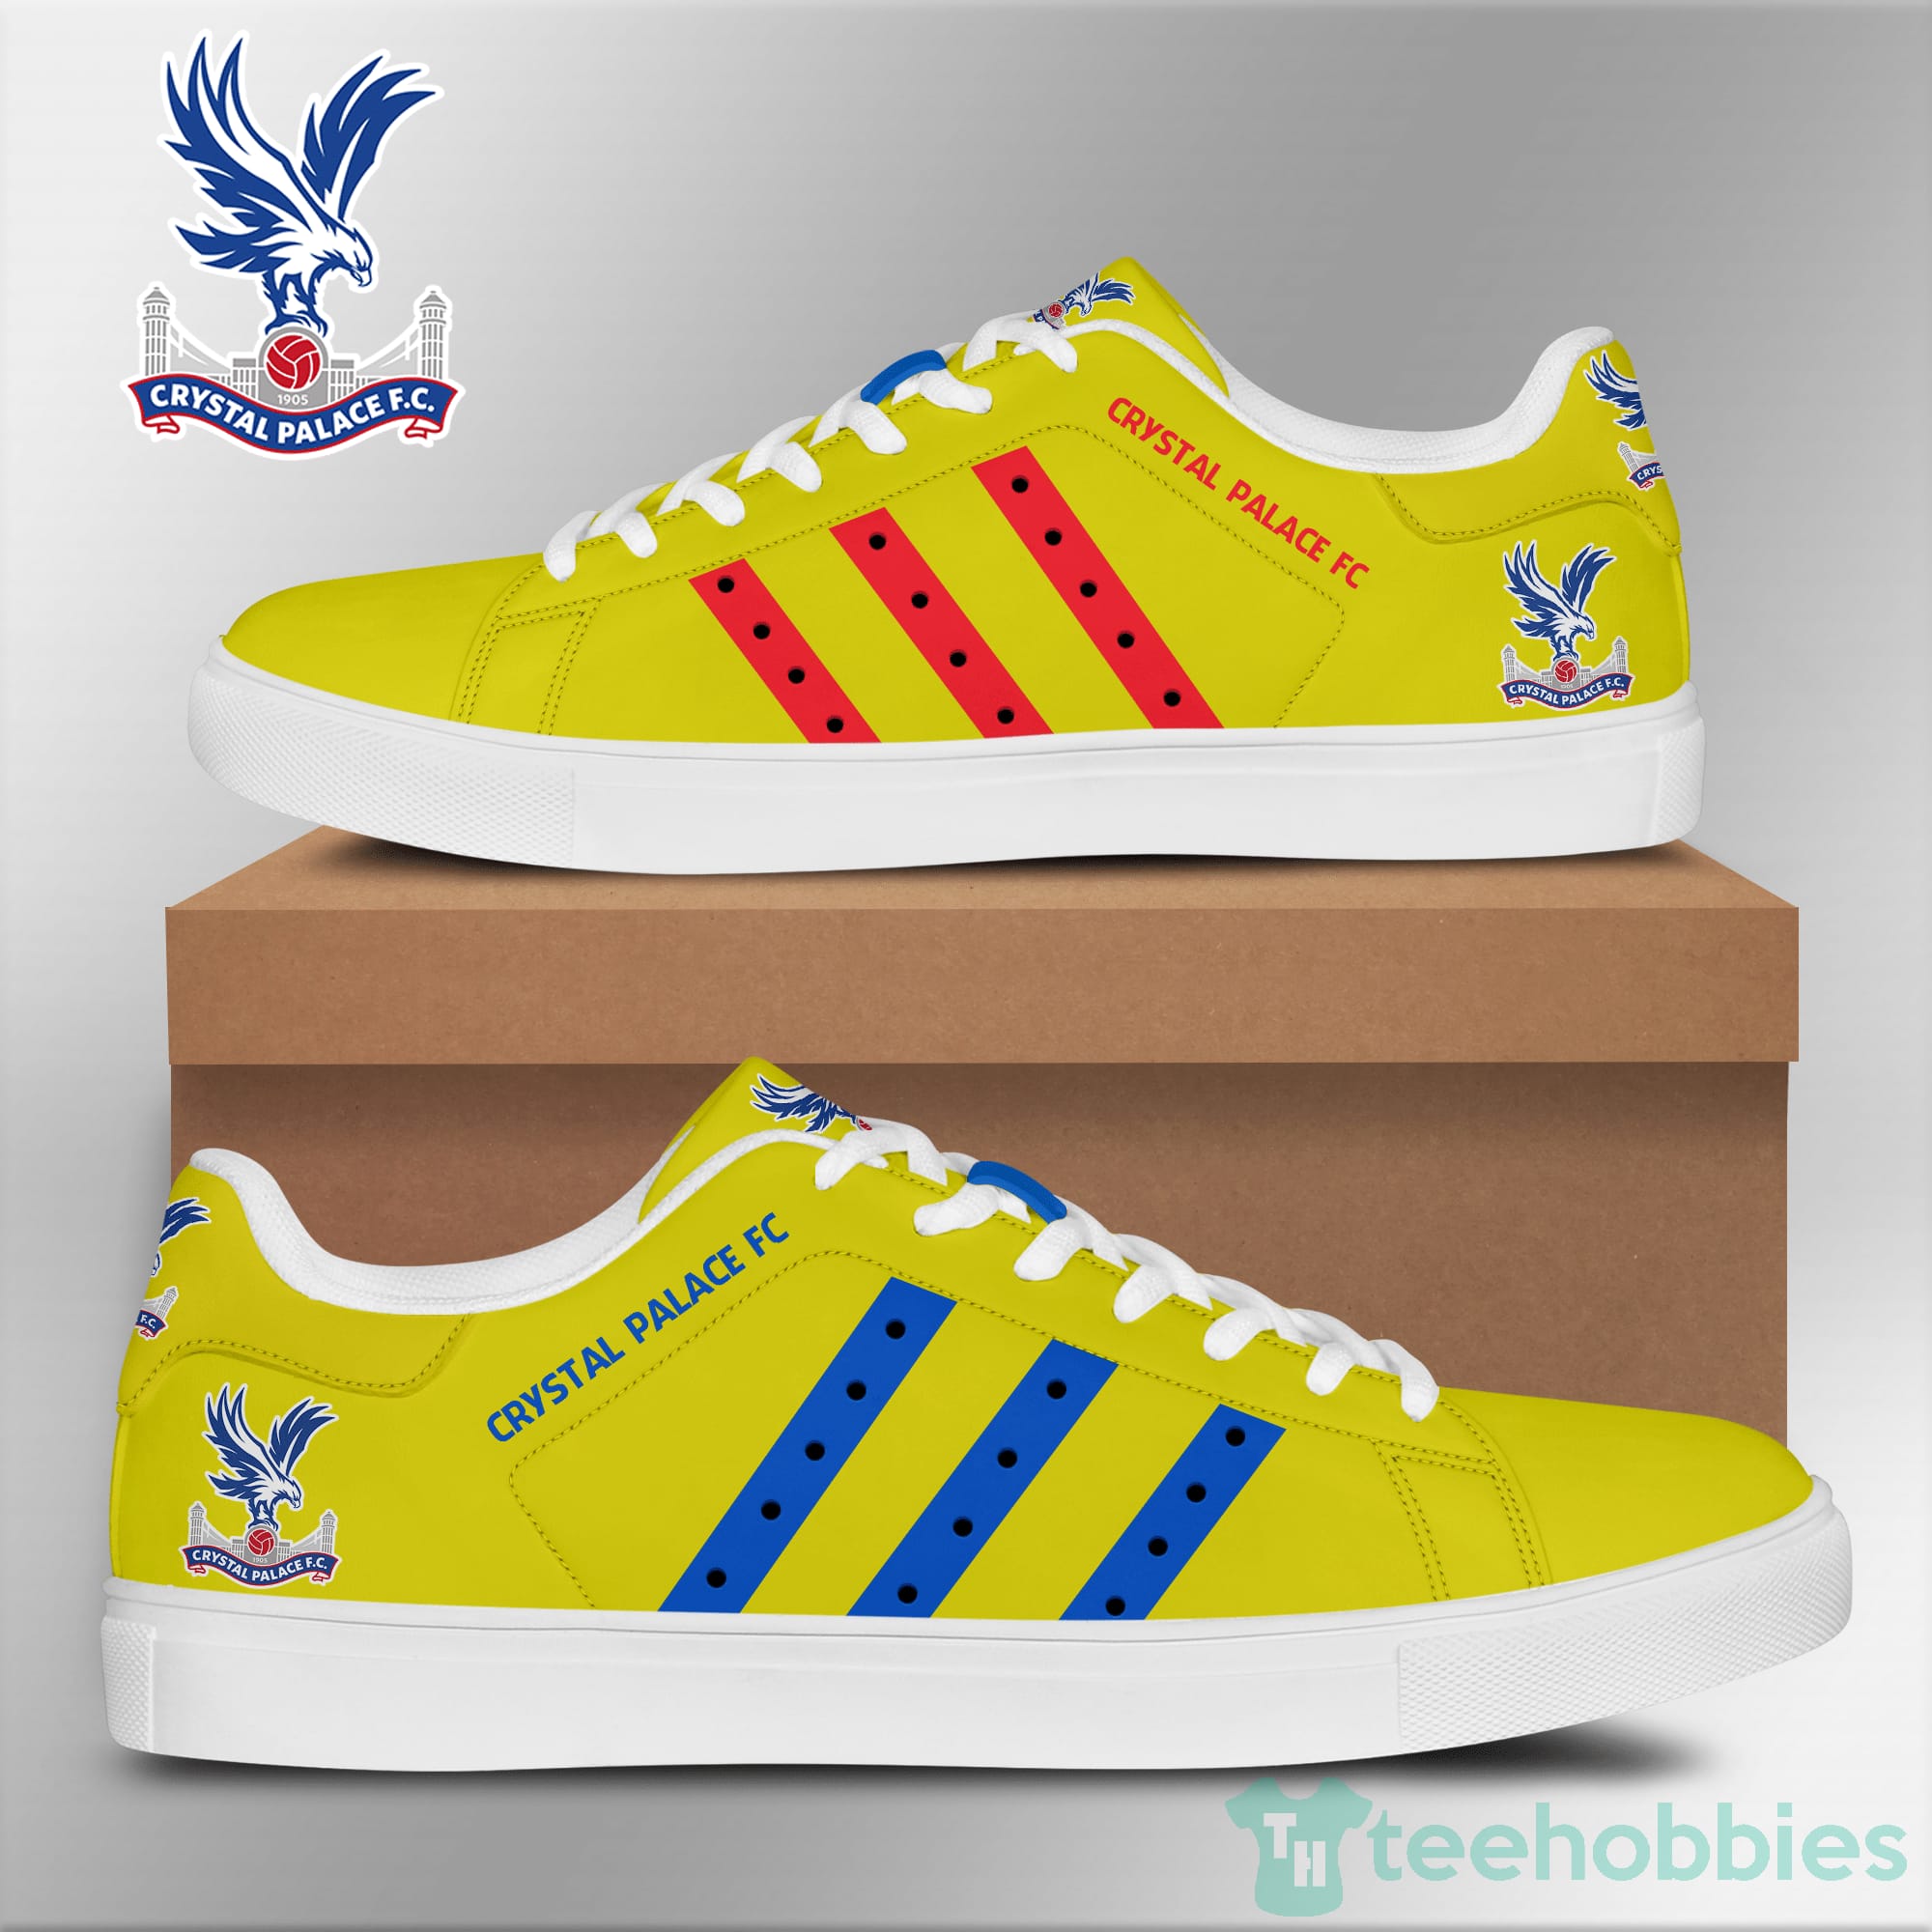 Crystal Palace Fc Yellow Low Top Skate Shoes